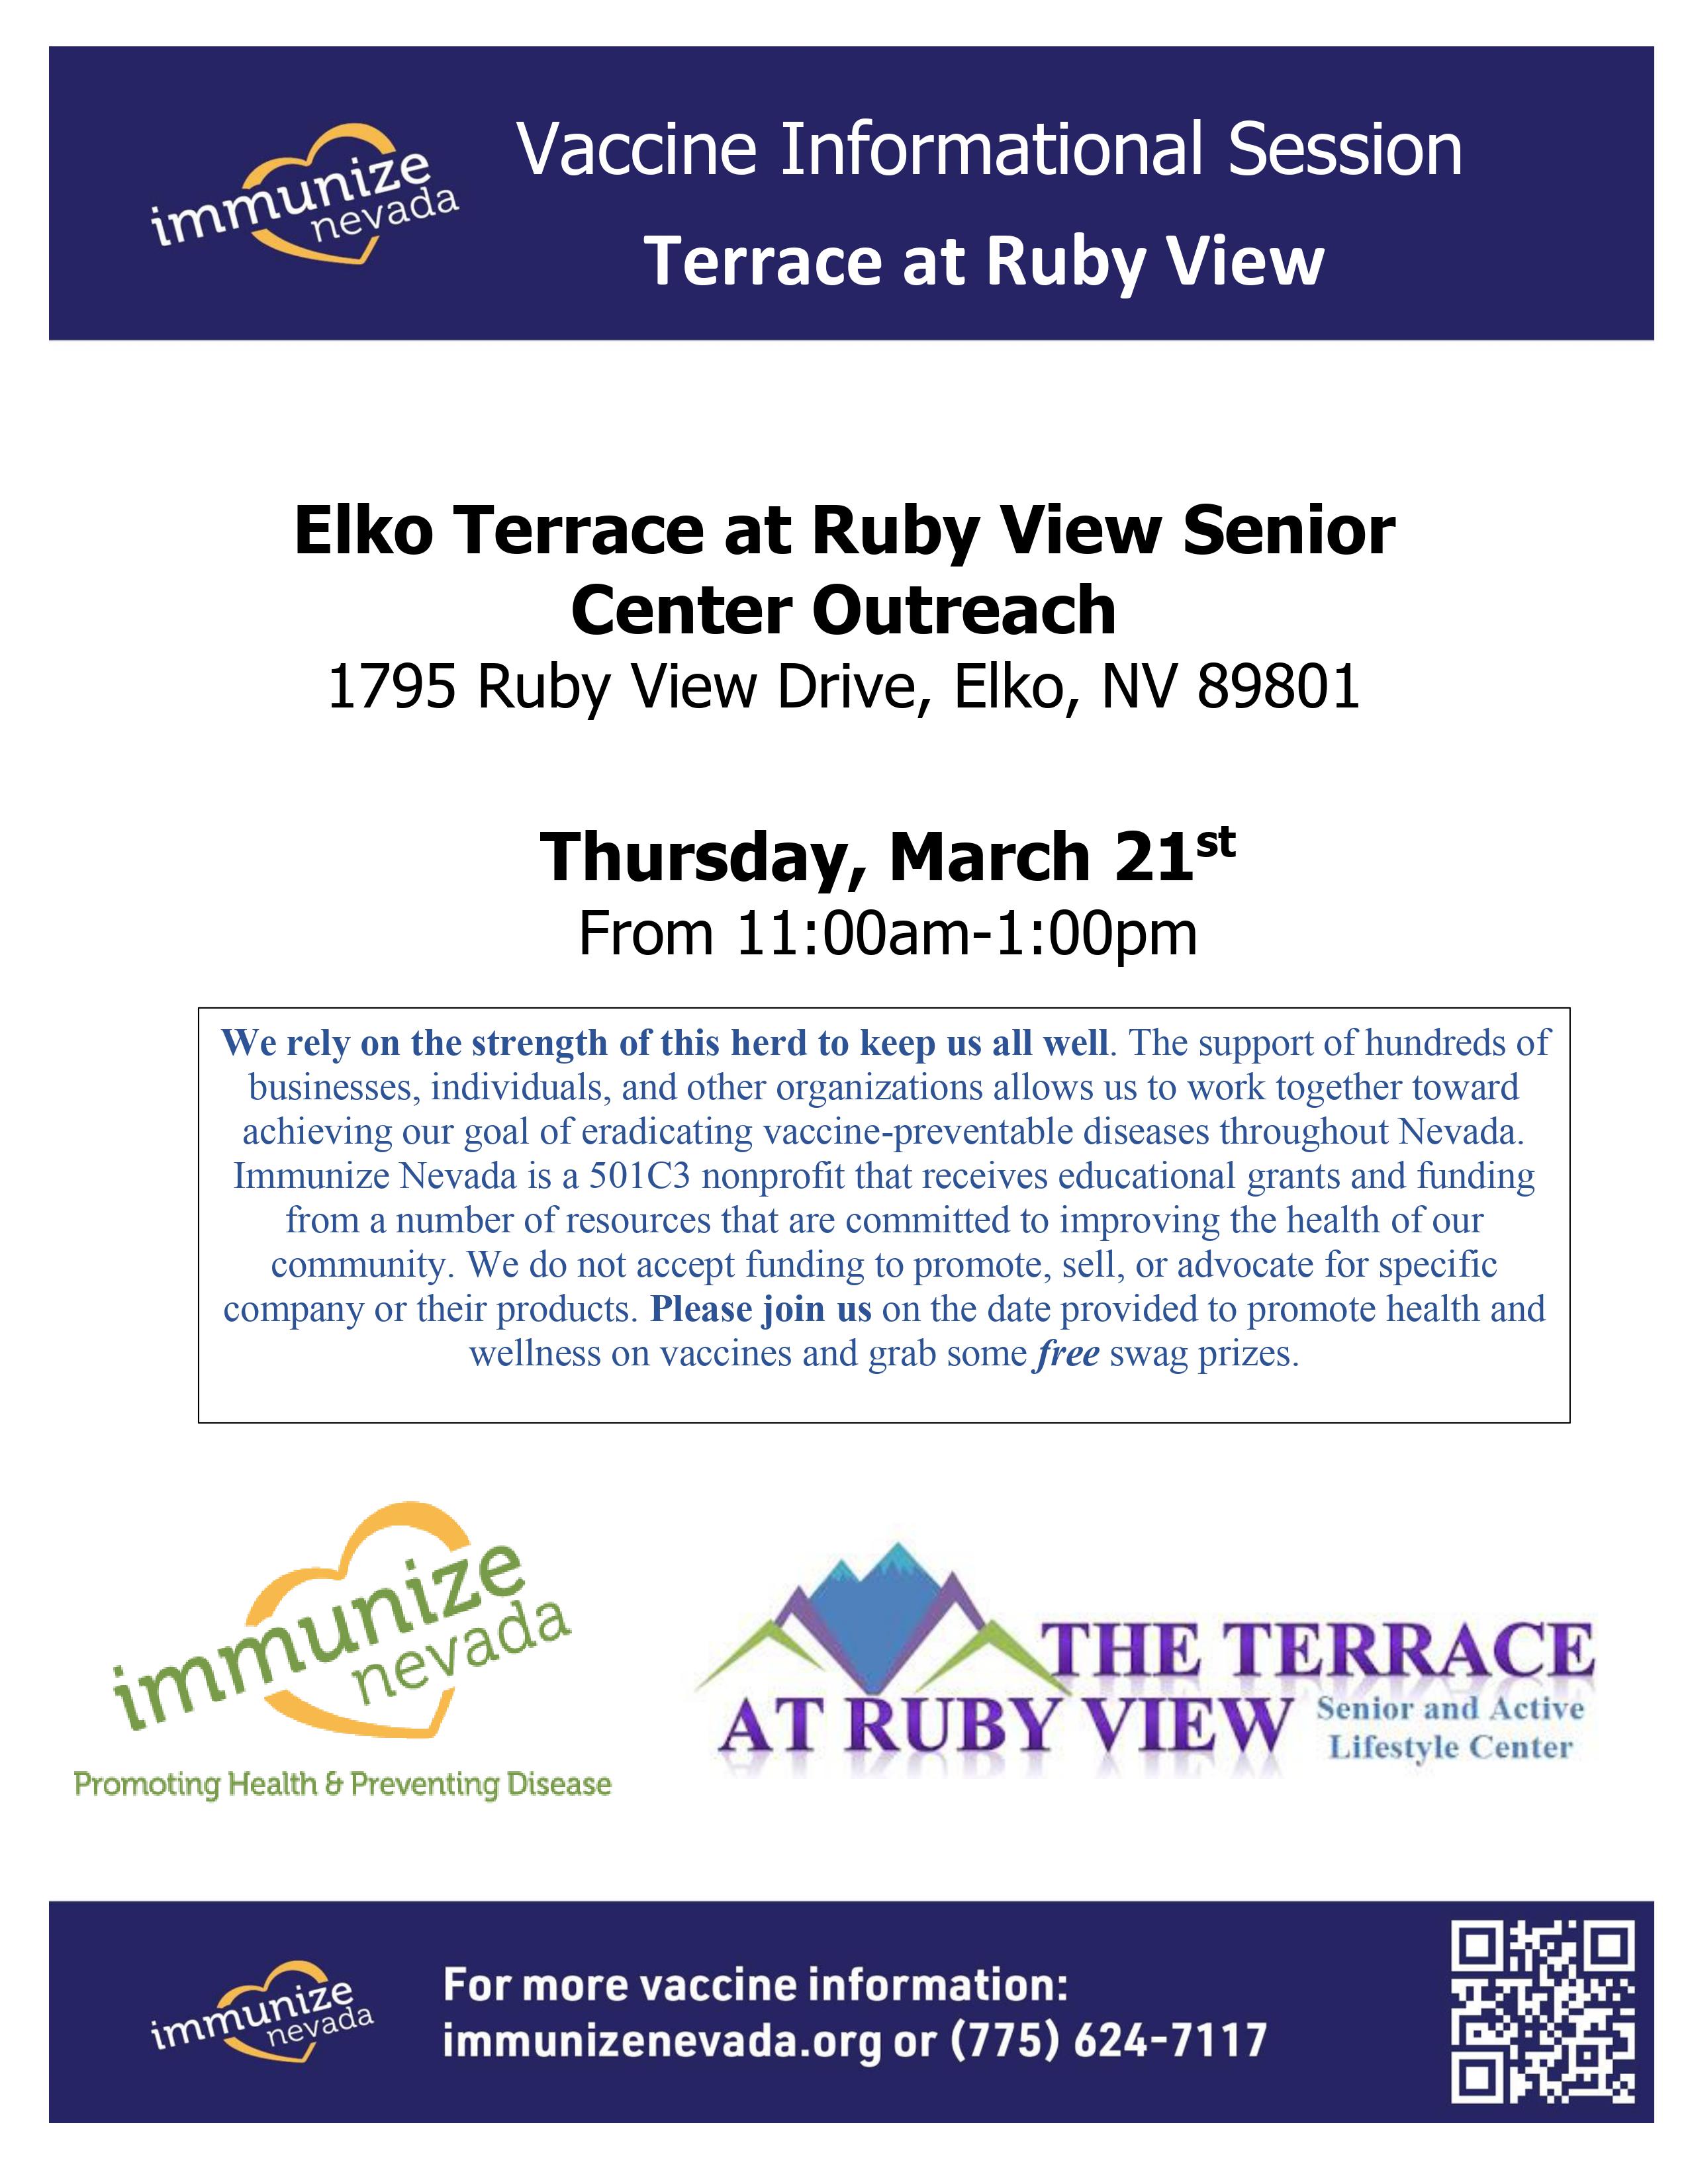 Elko Terrace at Ruby View Flyer 03.21.24 - Jenna Wong-Fortunato